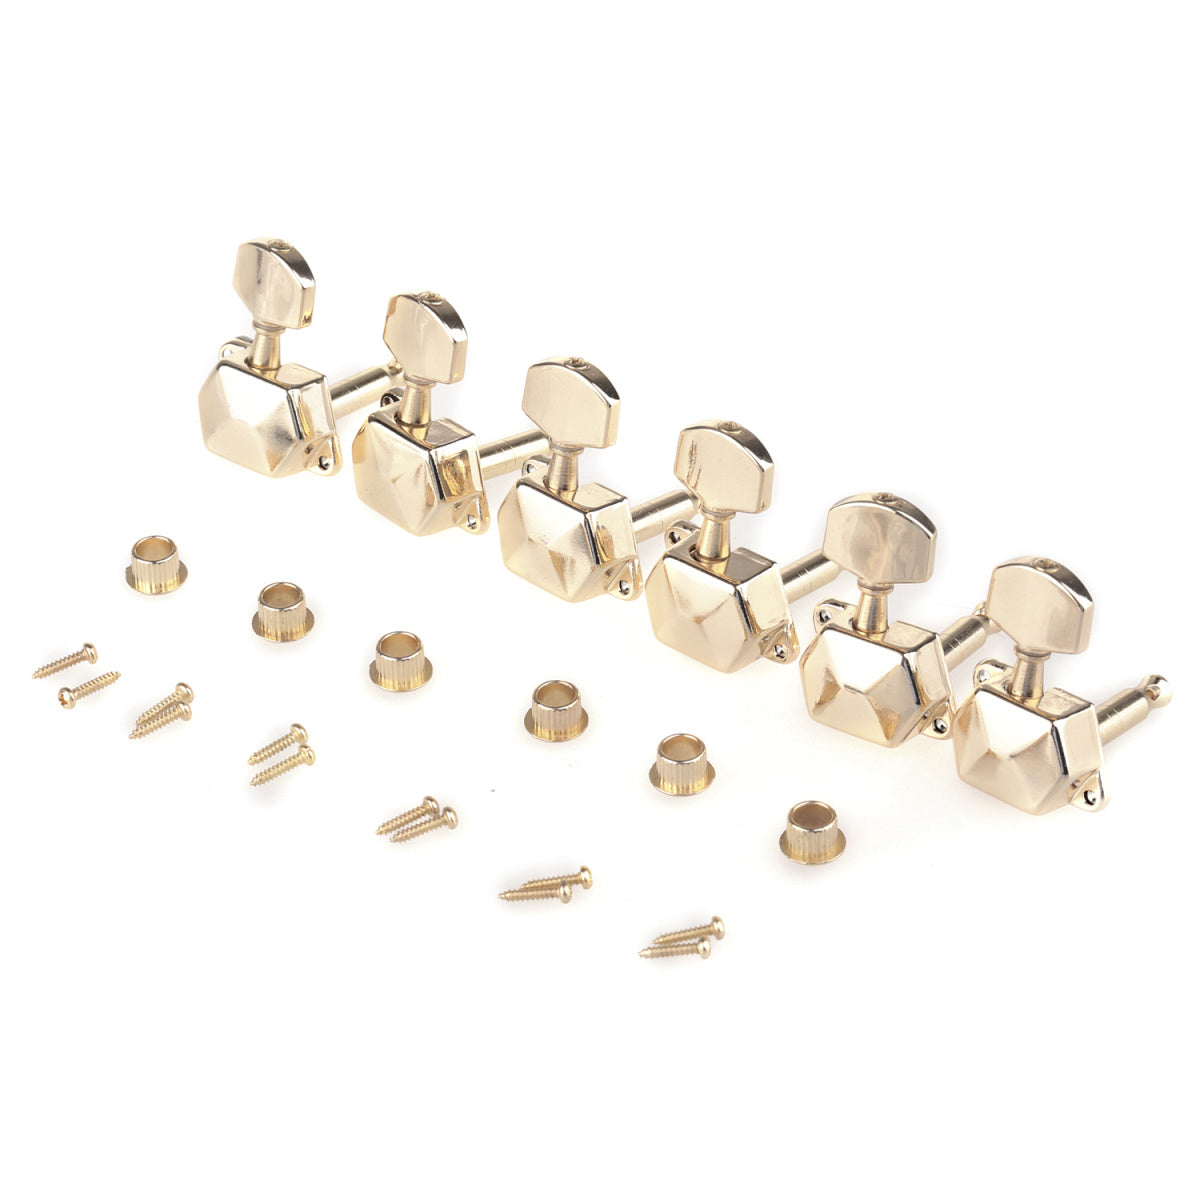 Musiclily Pro 6 in Line Guitar Semi Closed Tuners Machine Heads Tuning Pegs Keys Set for Electric Guitar, Gold